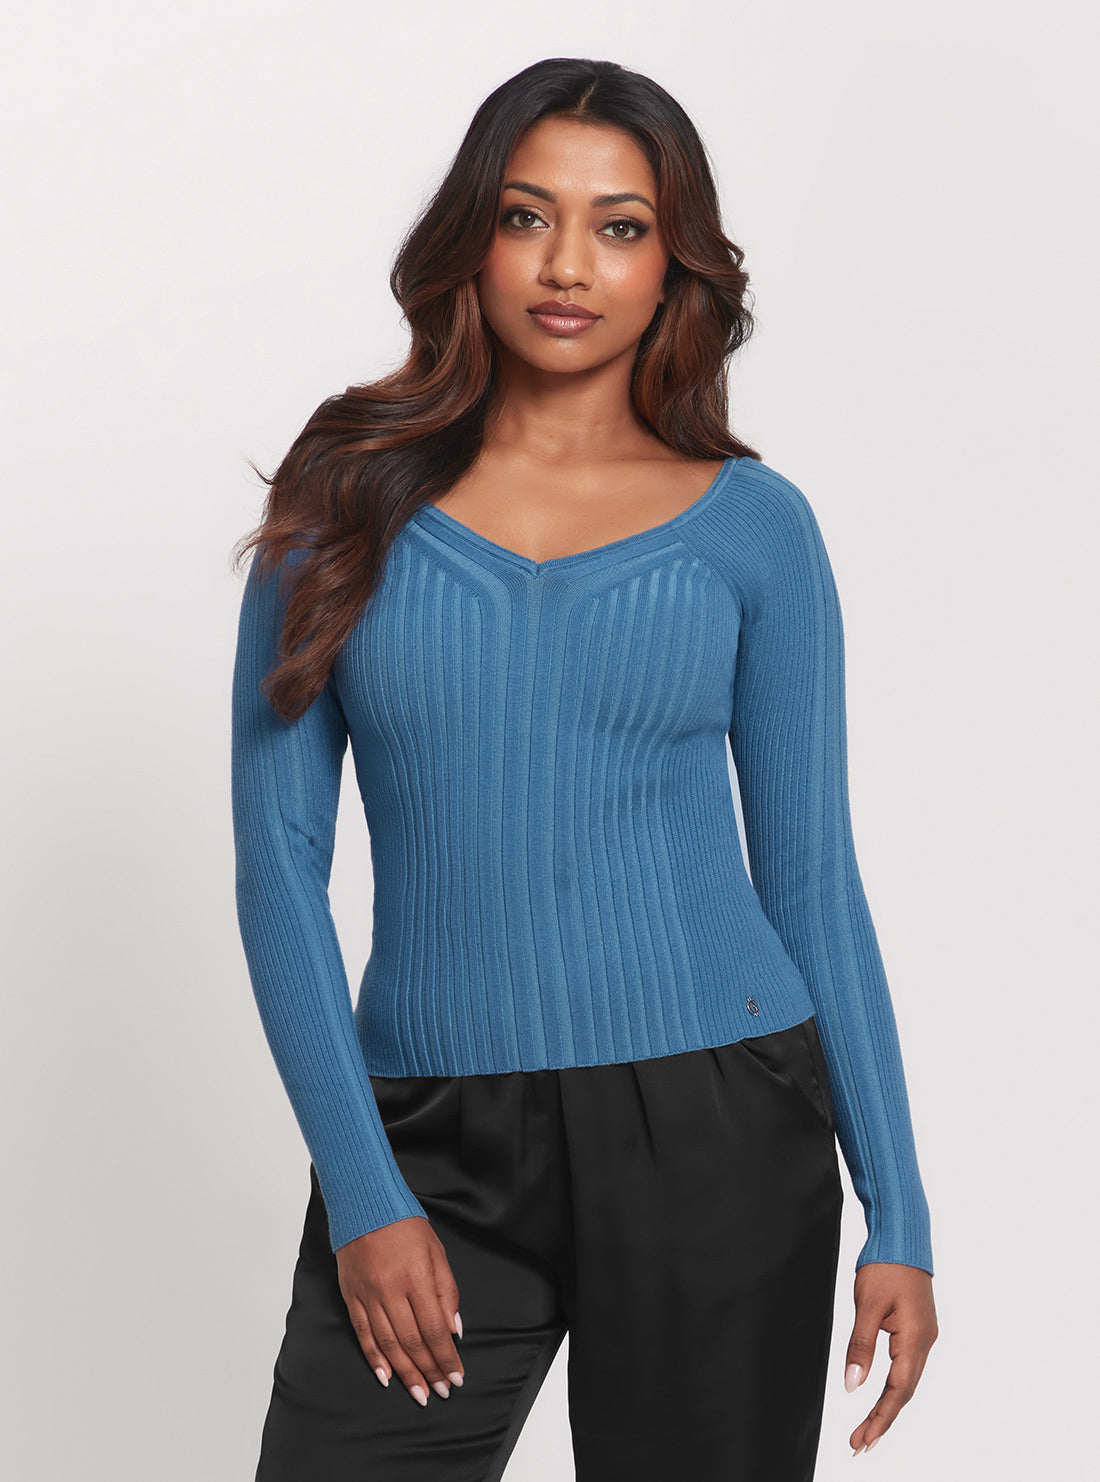 GUESS Blue Allie Long Sleeve Knit Top front view